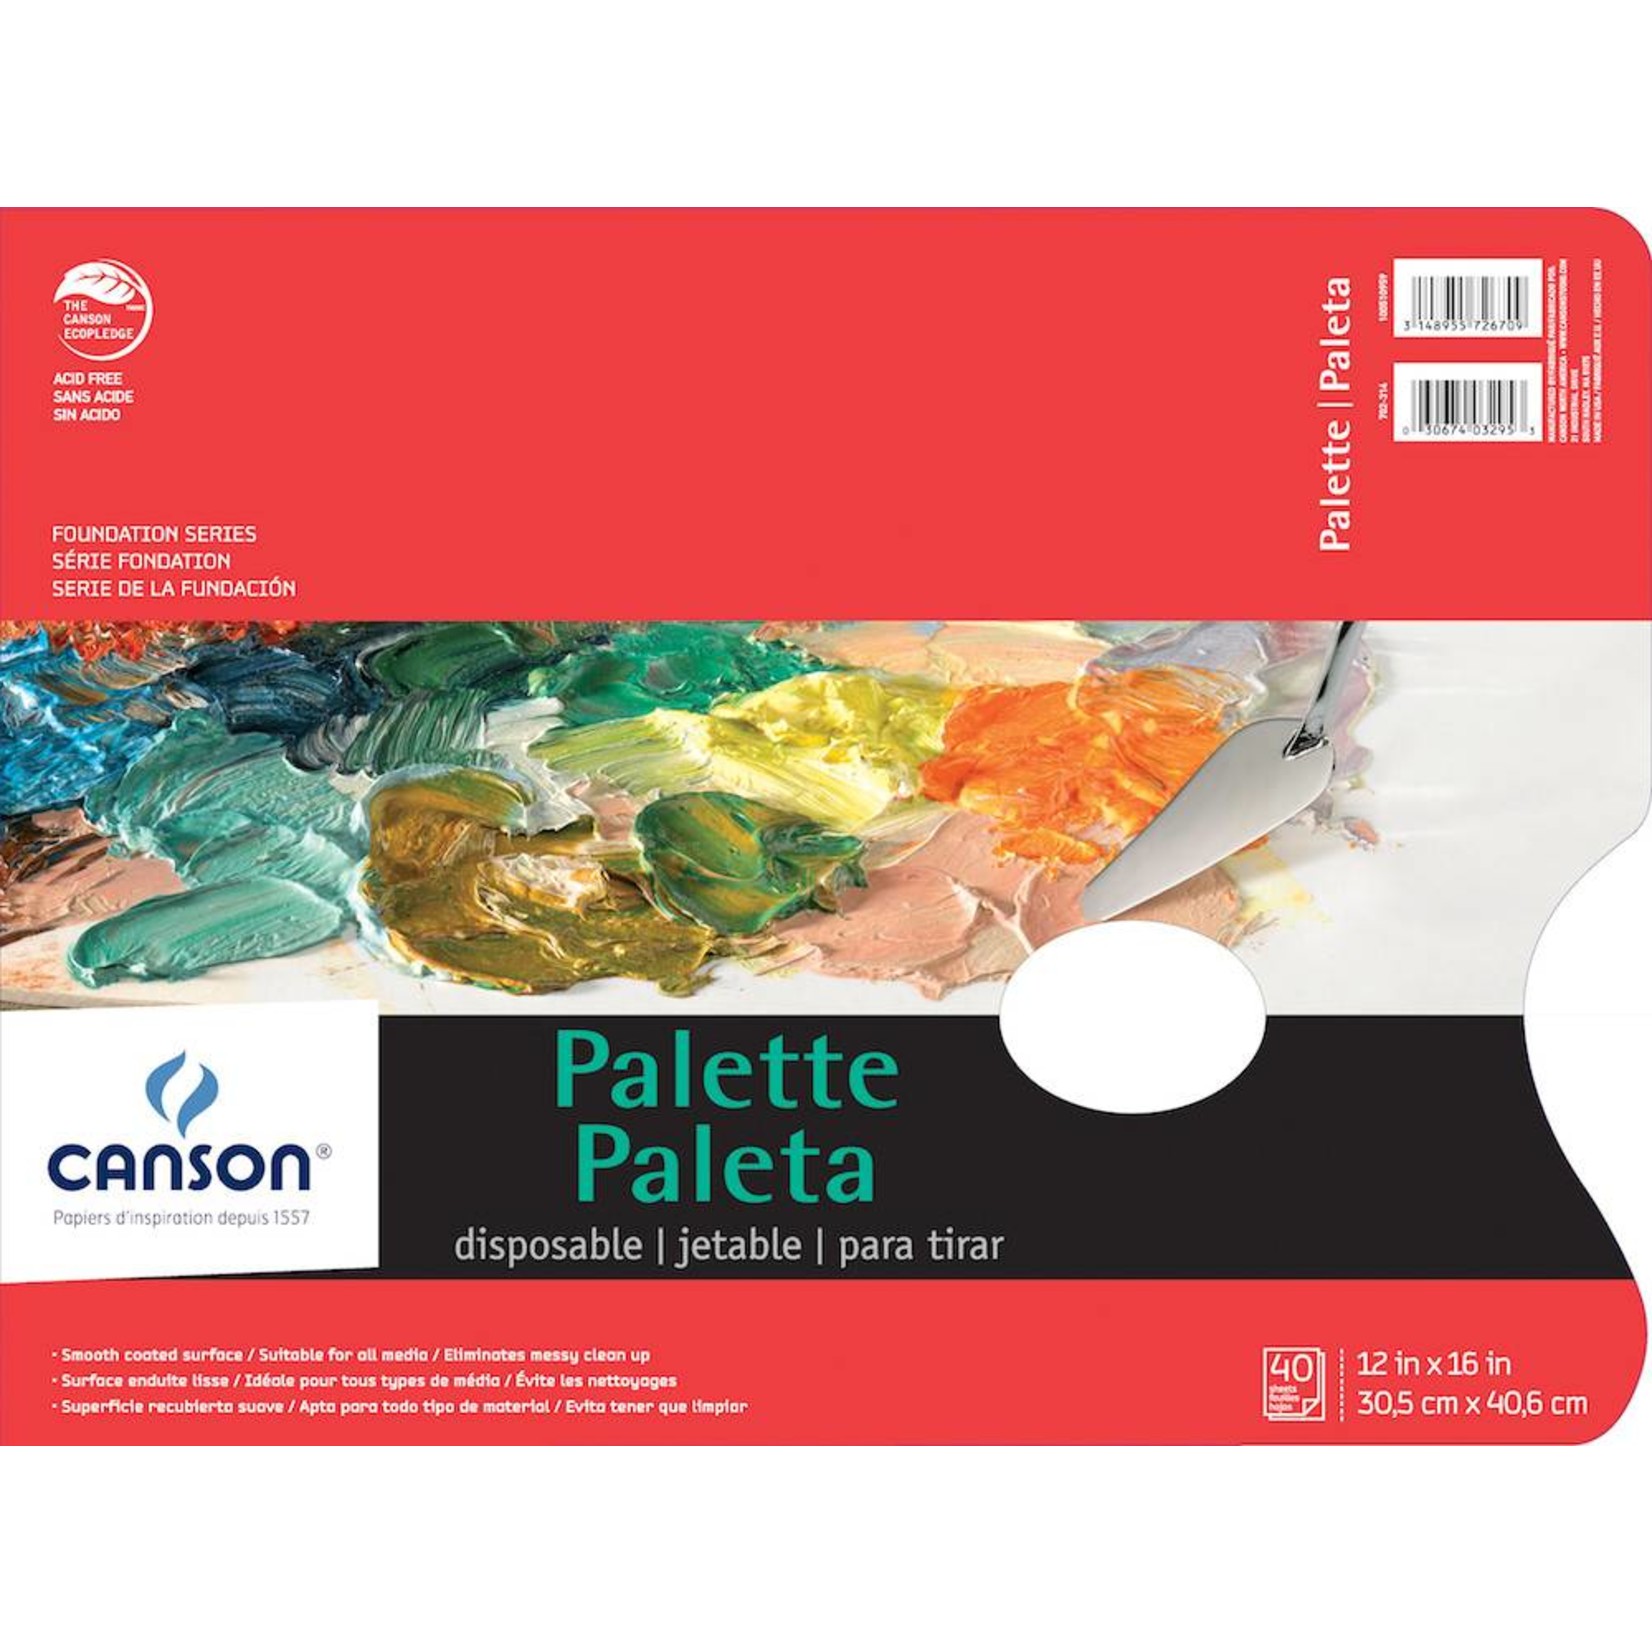 CANSON CANSON FOUNDATION DISPOSABLE PALETTE WITH HOLE